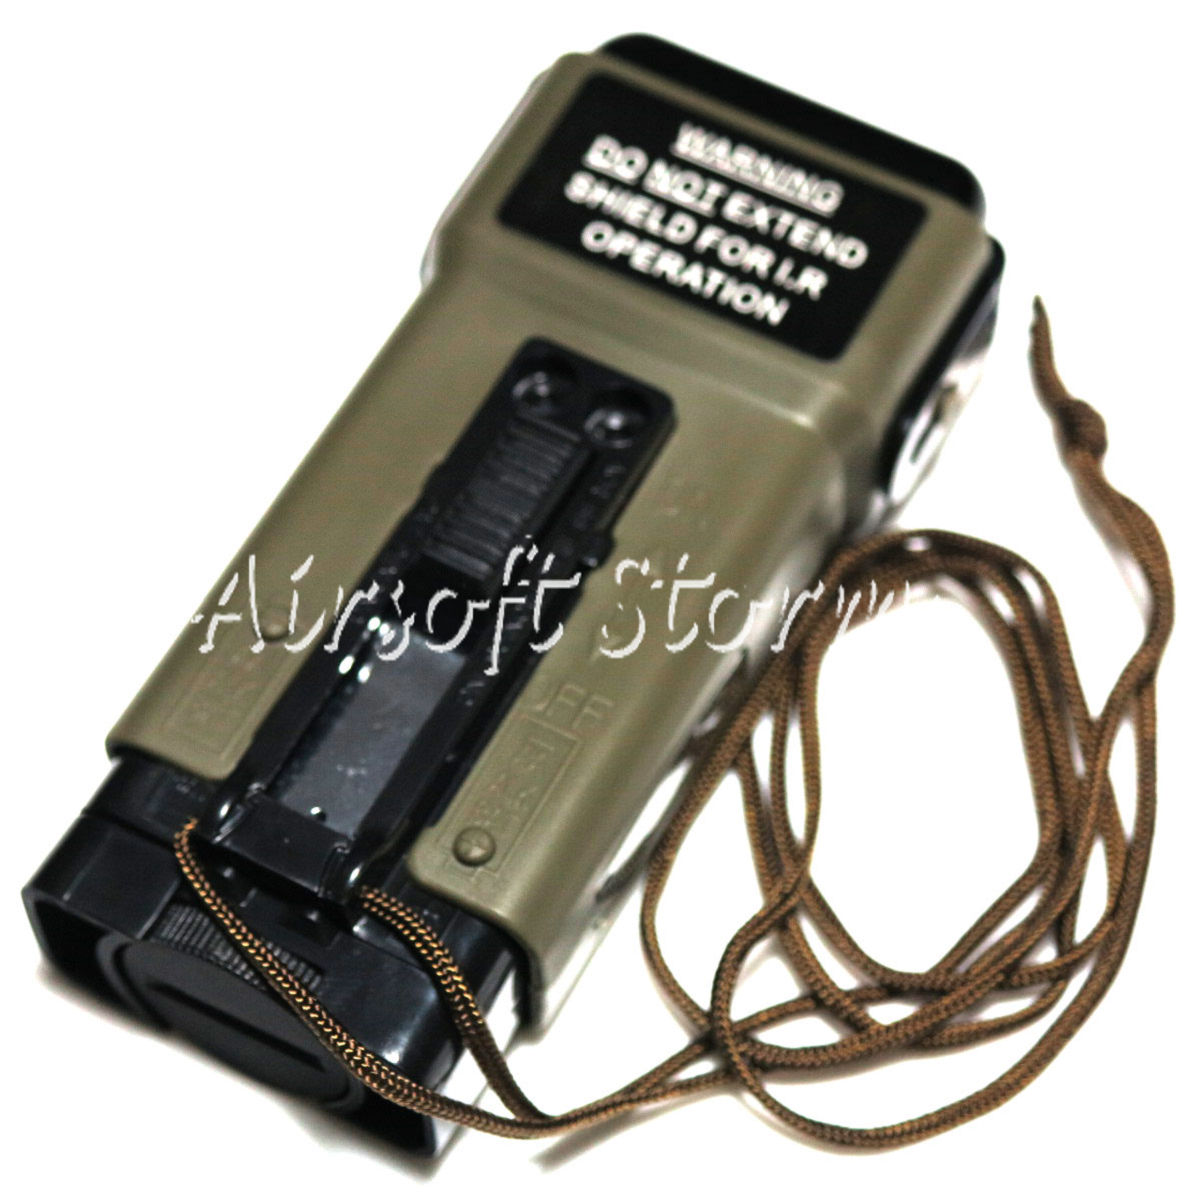 Airsoft AEG Shooting Gear G&P Military Distress Marker Light Type BB Loader 130rd GP267 Olive Drab OD